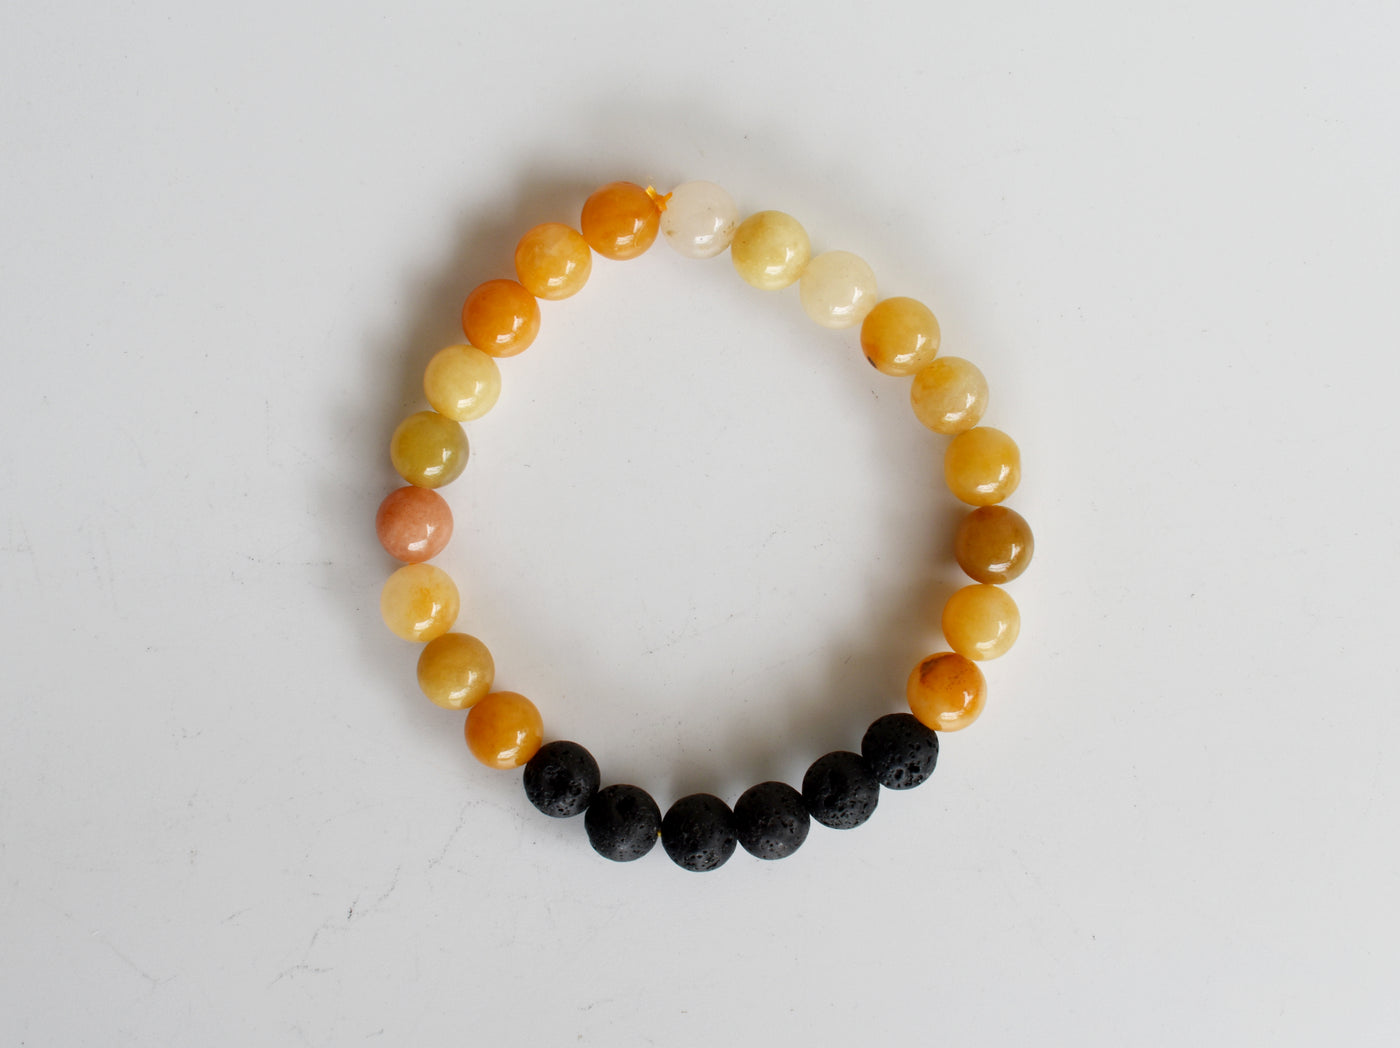 Yellow Aventurine Diffuser Bracelet, Lava Diffuser Jewelry, Aromatherapy, Essential Oil Bracelet, Spiritual Gift, Yoga Gift for Her